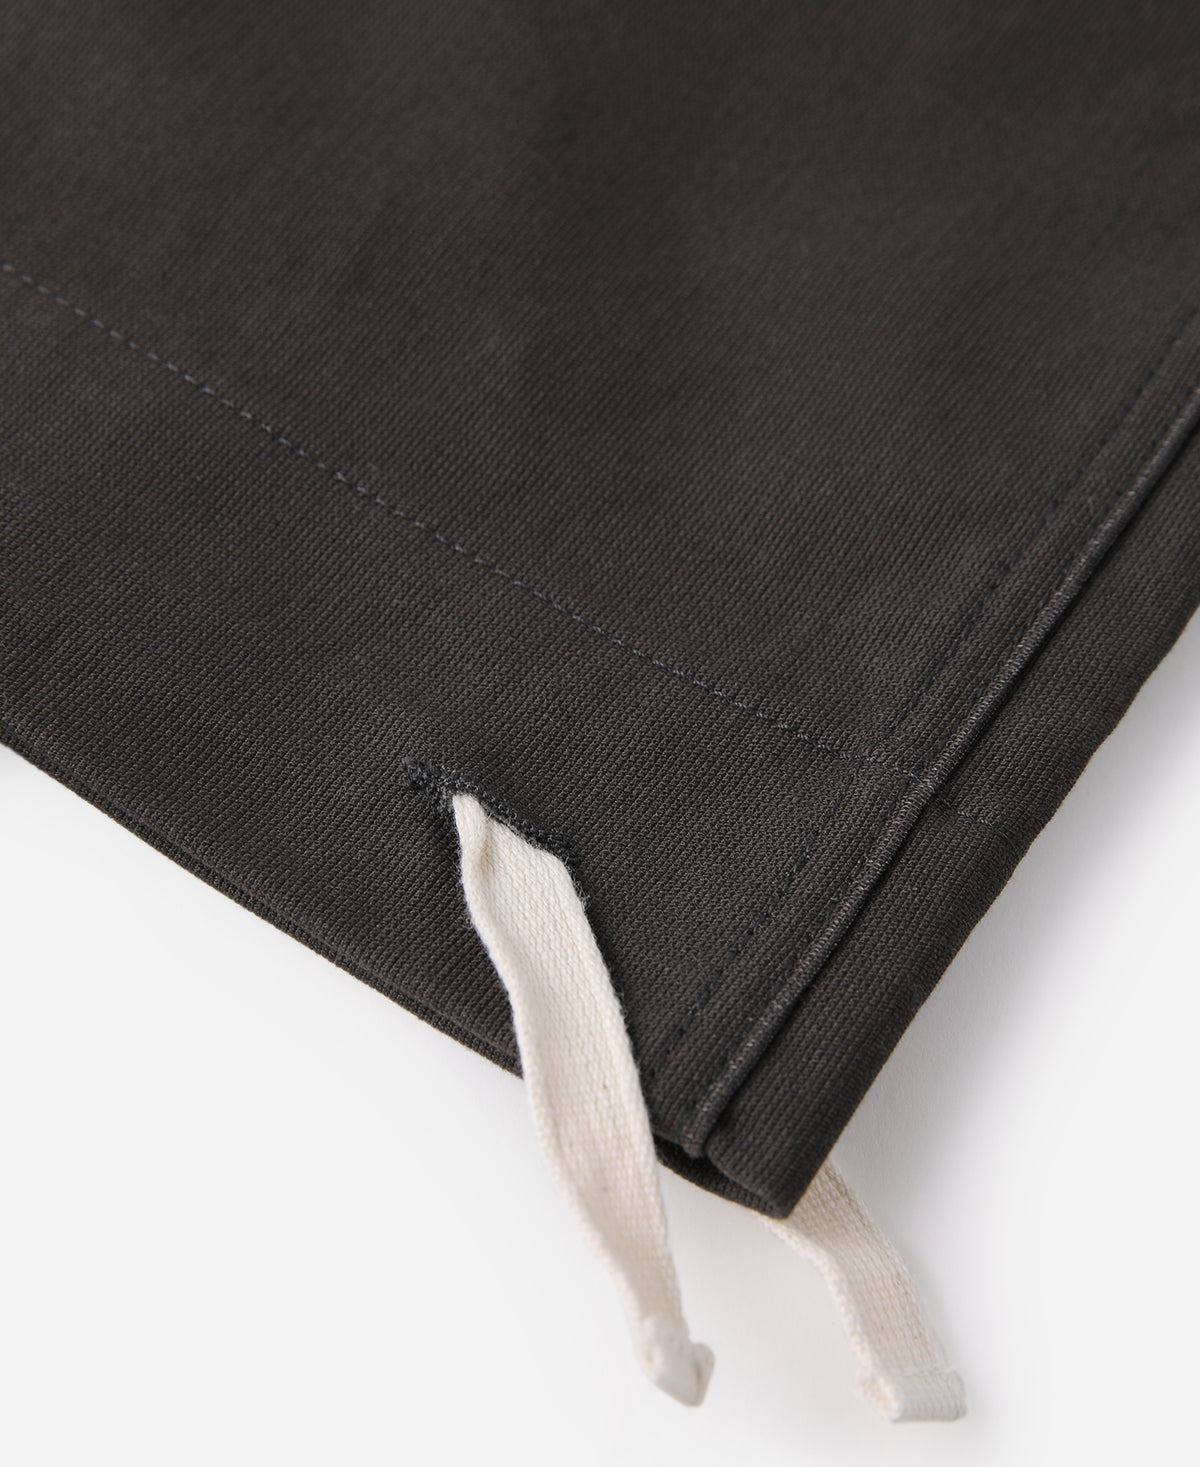 Experimental Test Sample Protective Cover Pants - Dark Brown